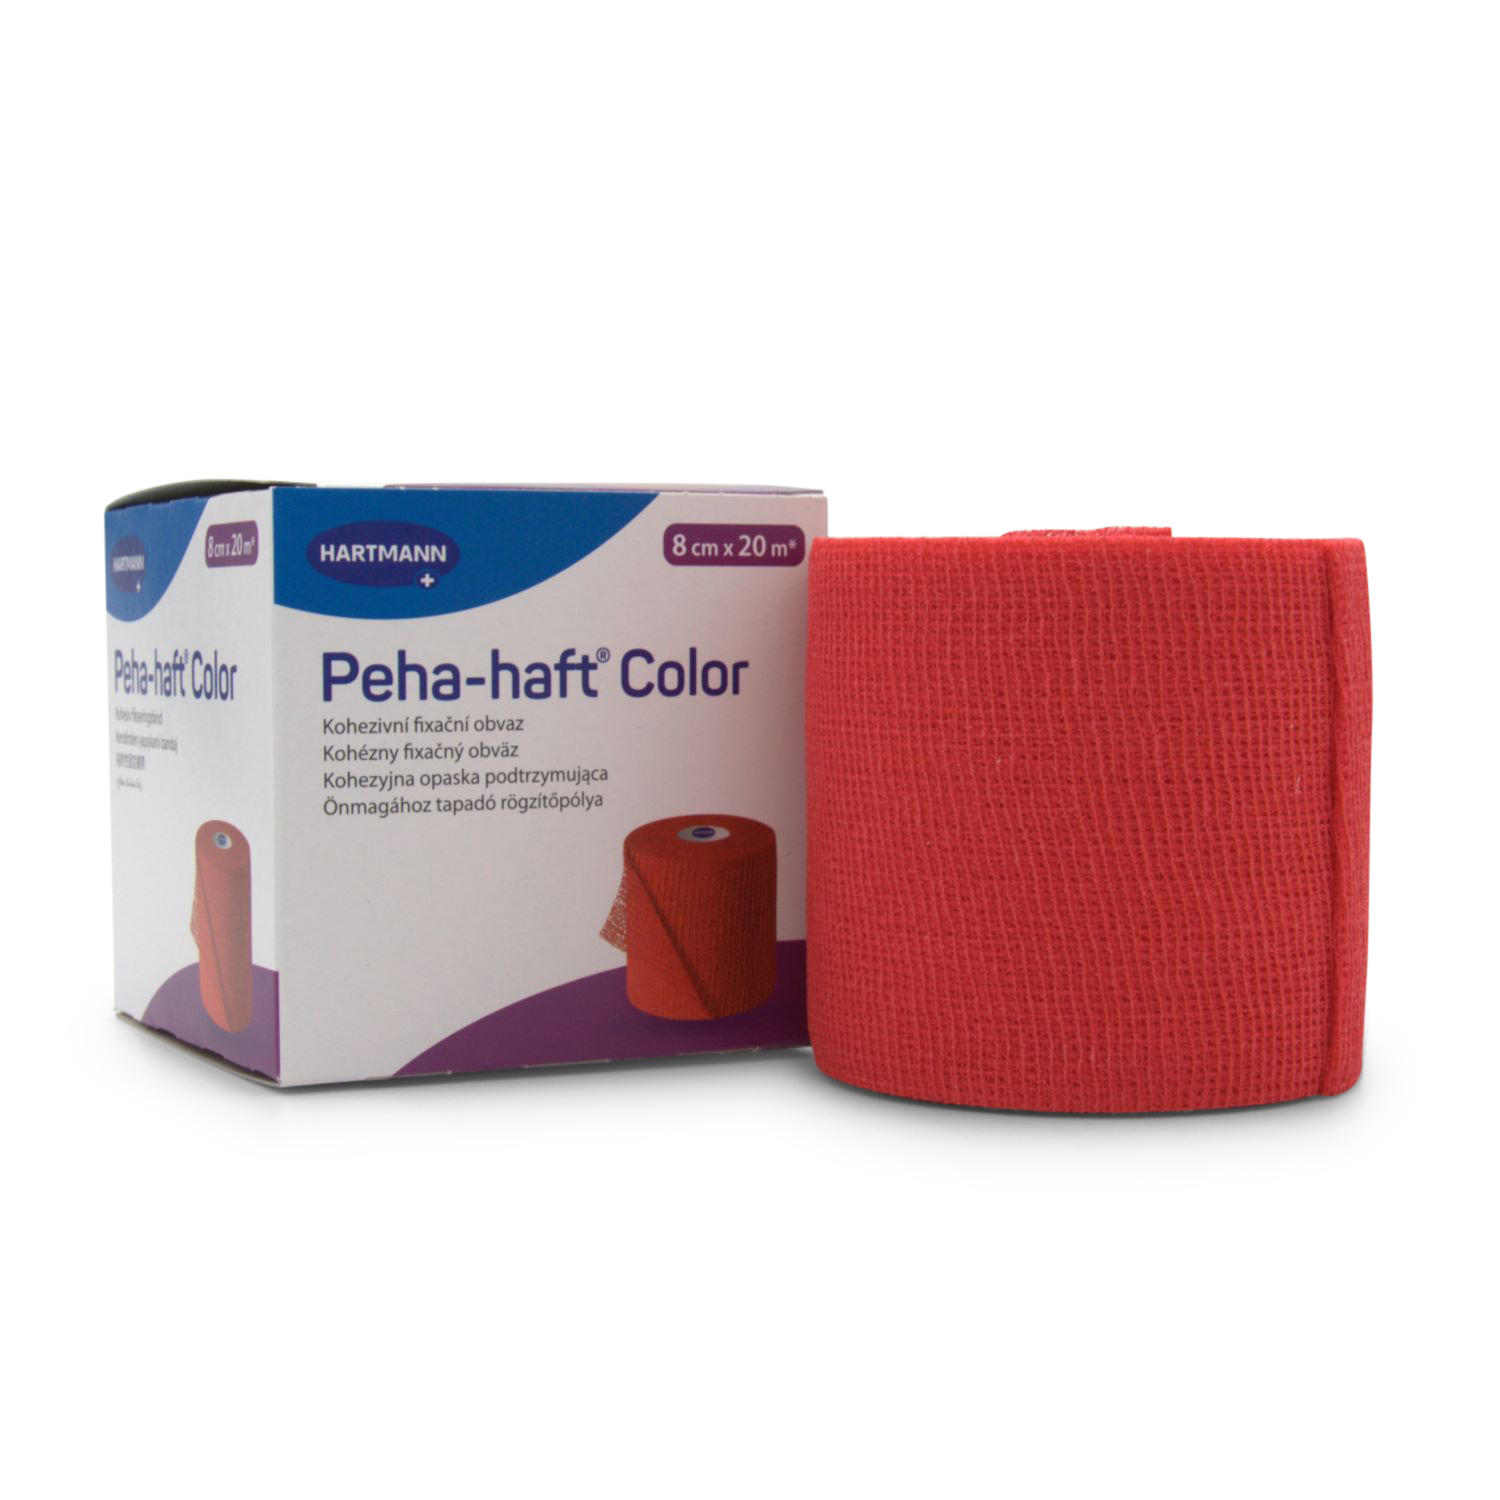 Peha-haft® Color Fixierbinde (20 m x 8 cm, rot)